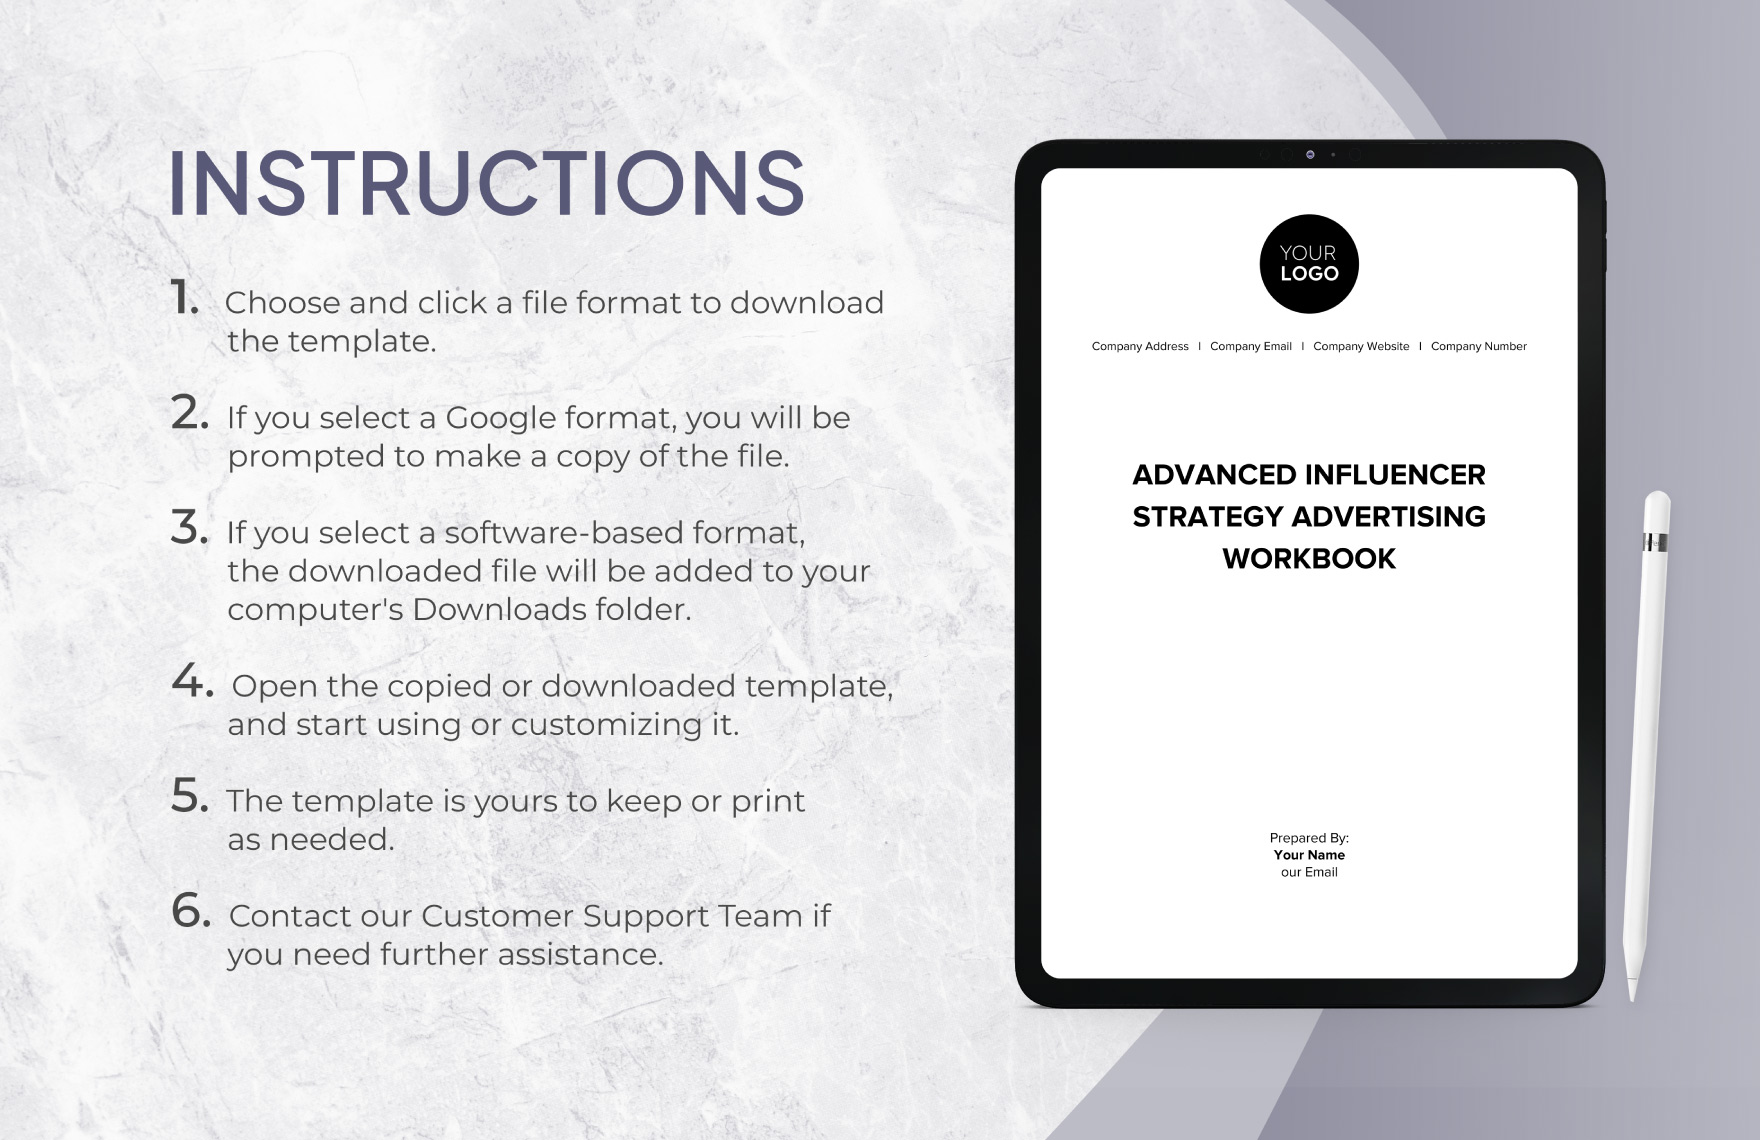 Advanced Influencer Strategy Advertising Workbook Template